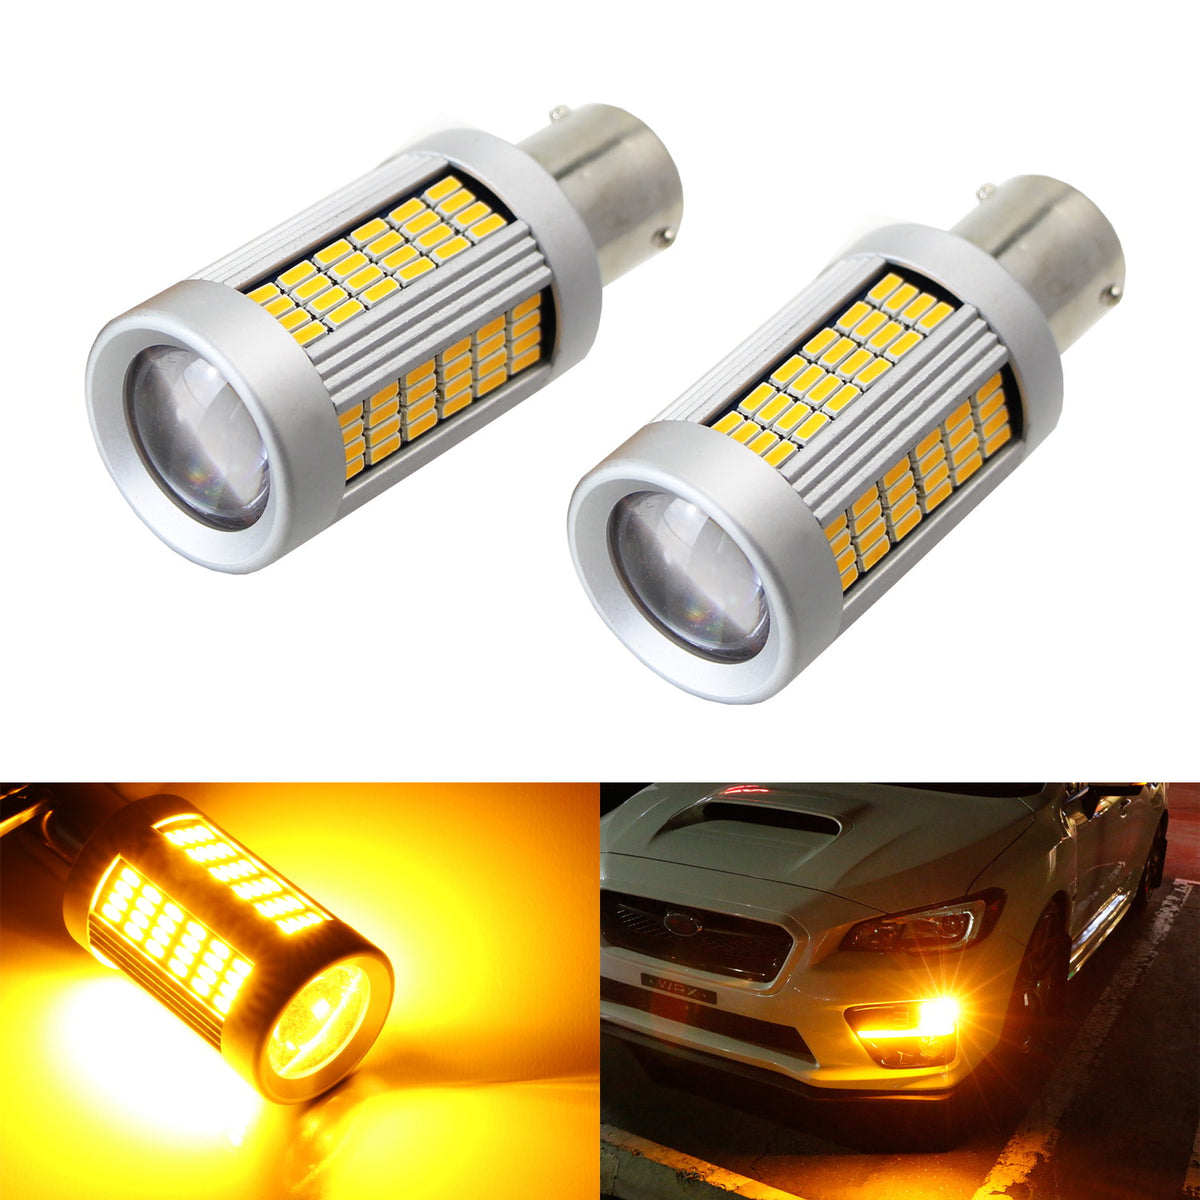 VEHICODE 7507 PY21W LED Bulb Switchback White Amber CANBus Error Free  BAU15S 12496 Turn Signal Light with Built in Resistor Anti Hyper Flash for  Car